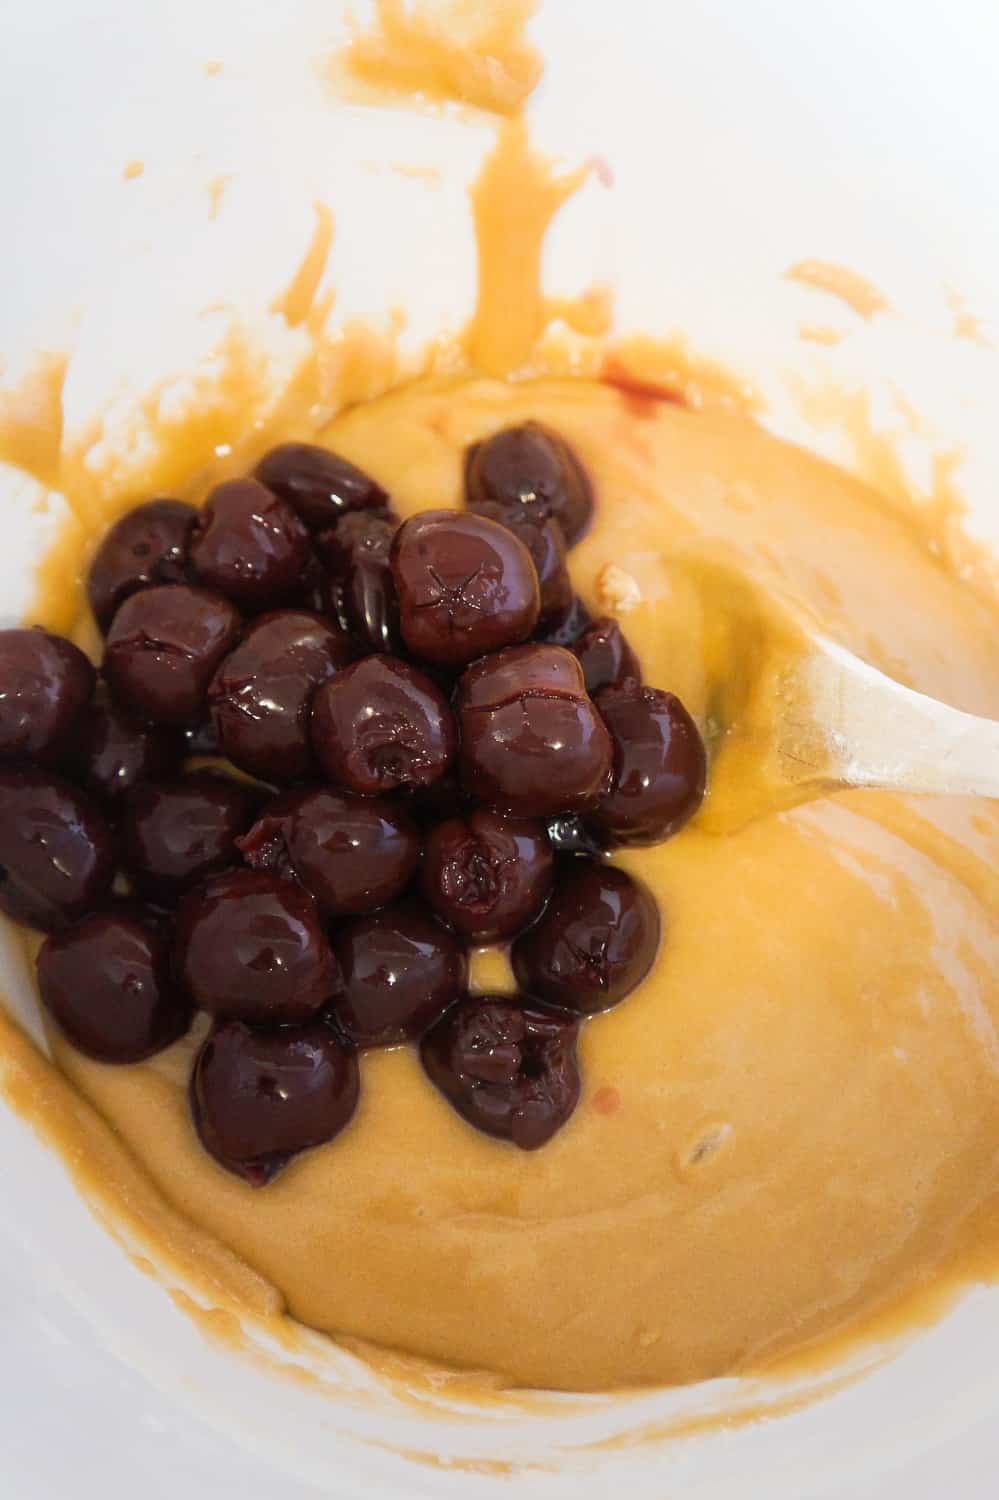 blondie batter with sour cherries added in a mixing bowl